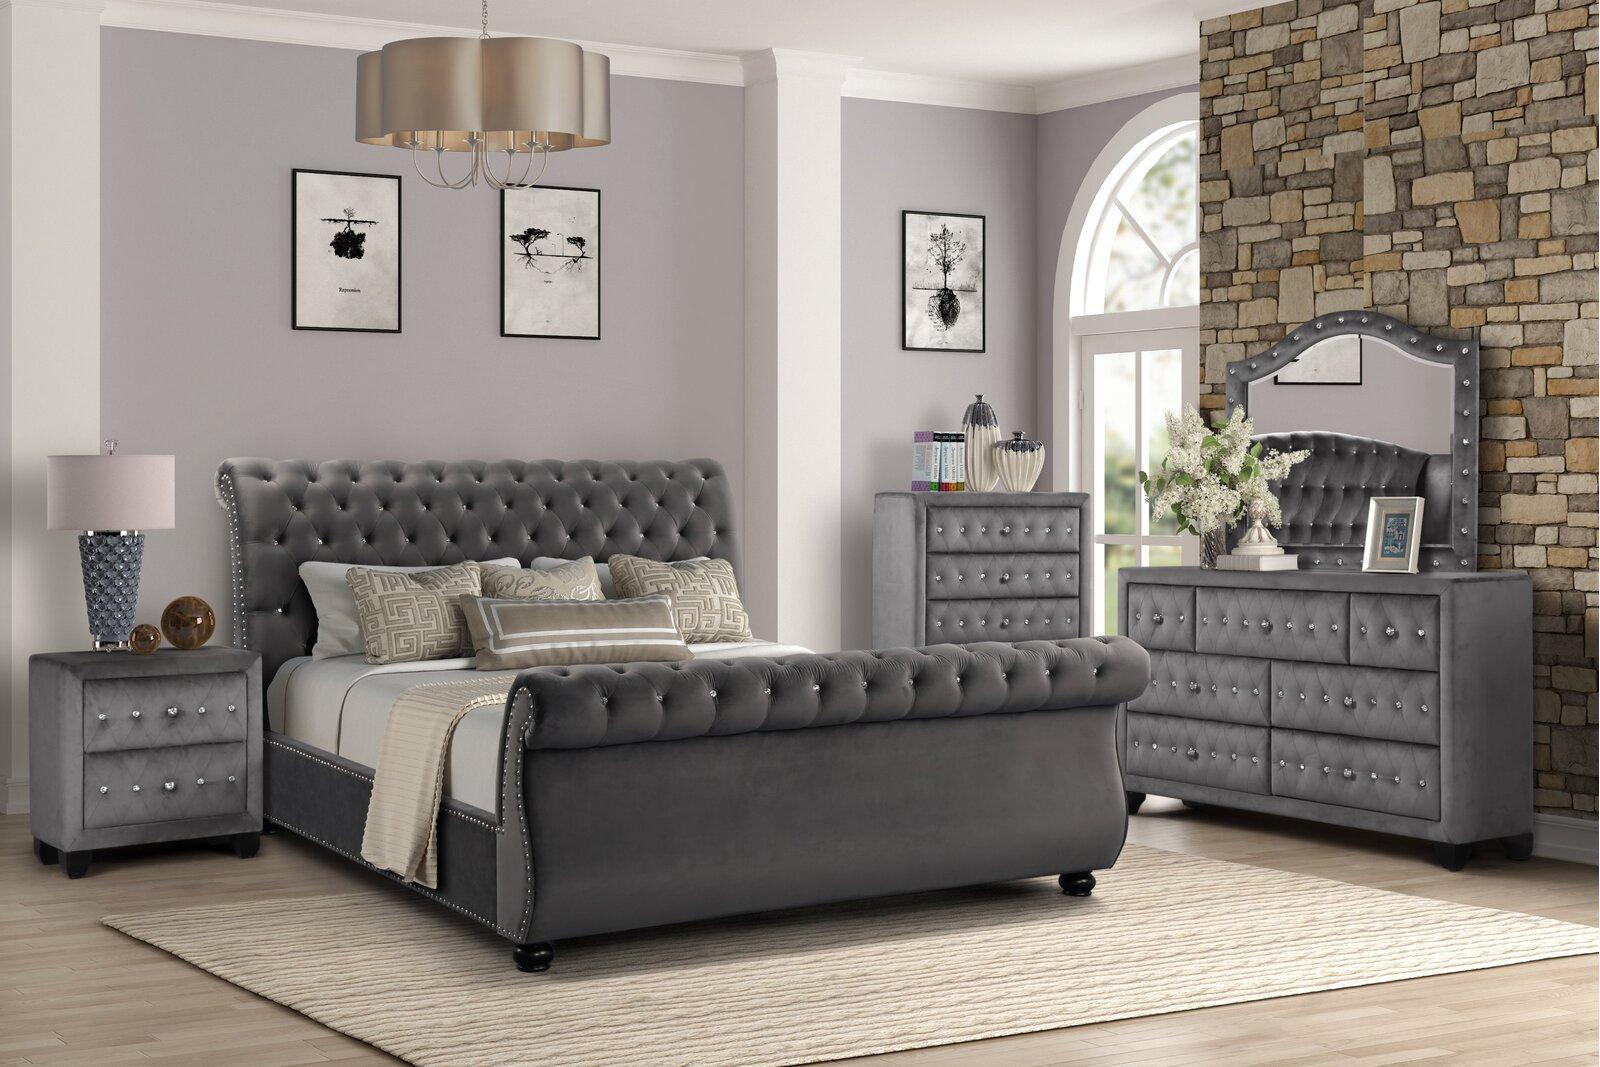 Contemporary, Modern Sleight Bedroom Set KENDALL GHF-808857587787-Set-5 in Gray 